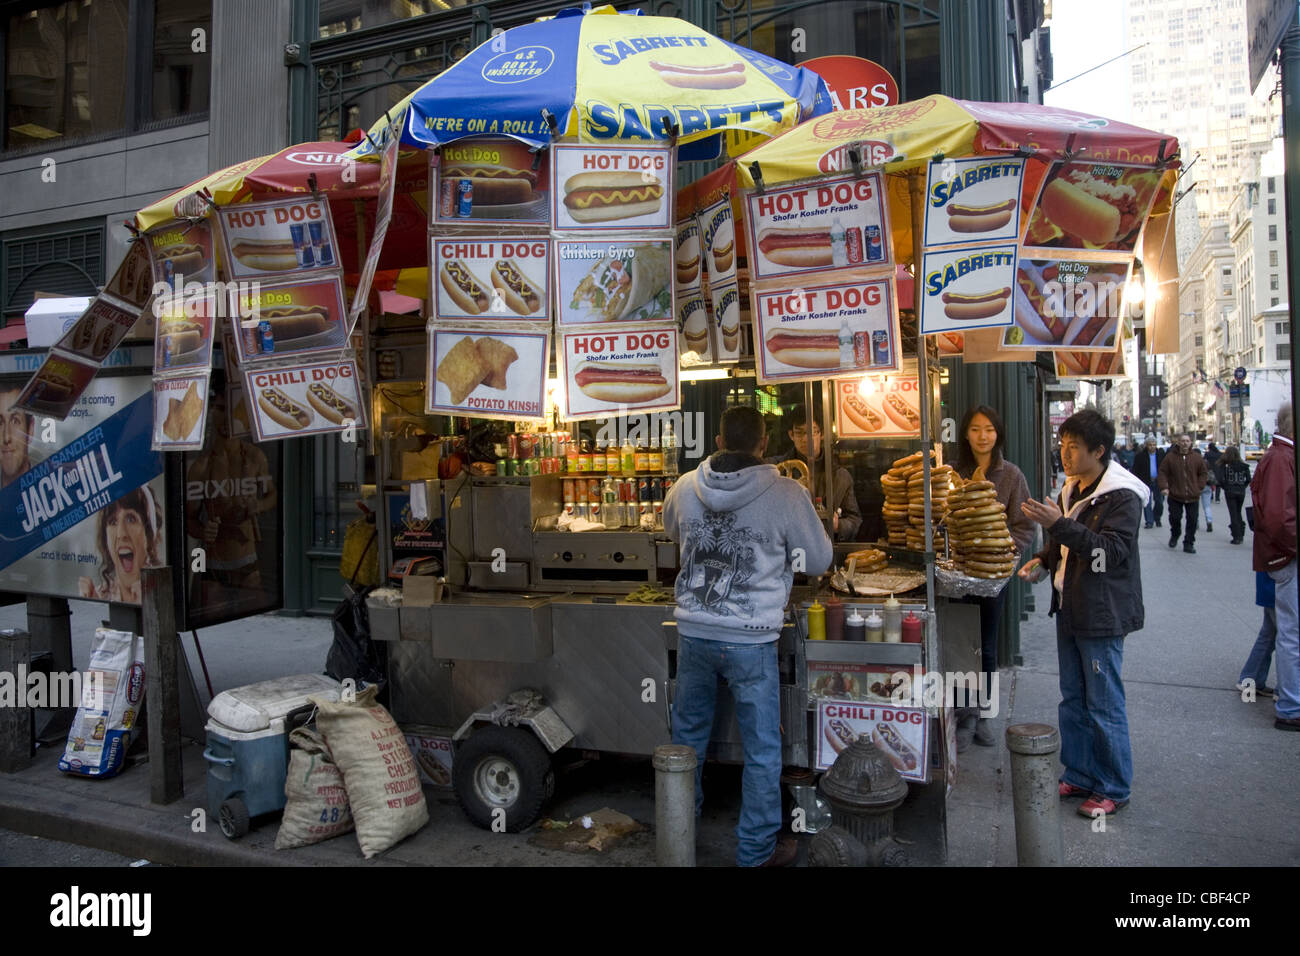 Hot dog vendor on 5th Avenue in NYC. Stock Photo